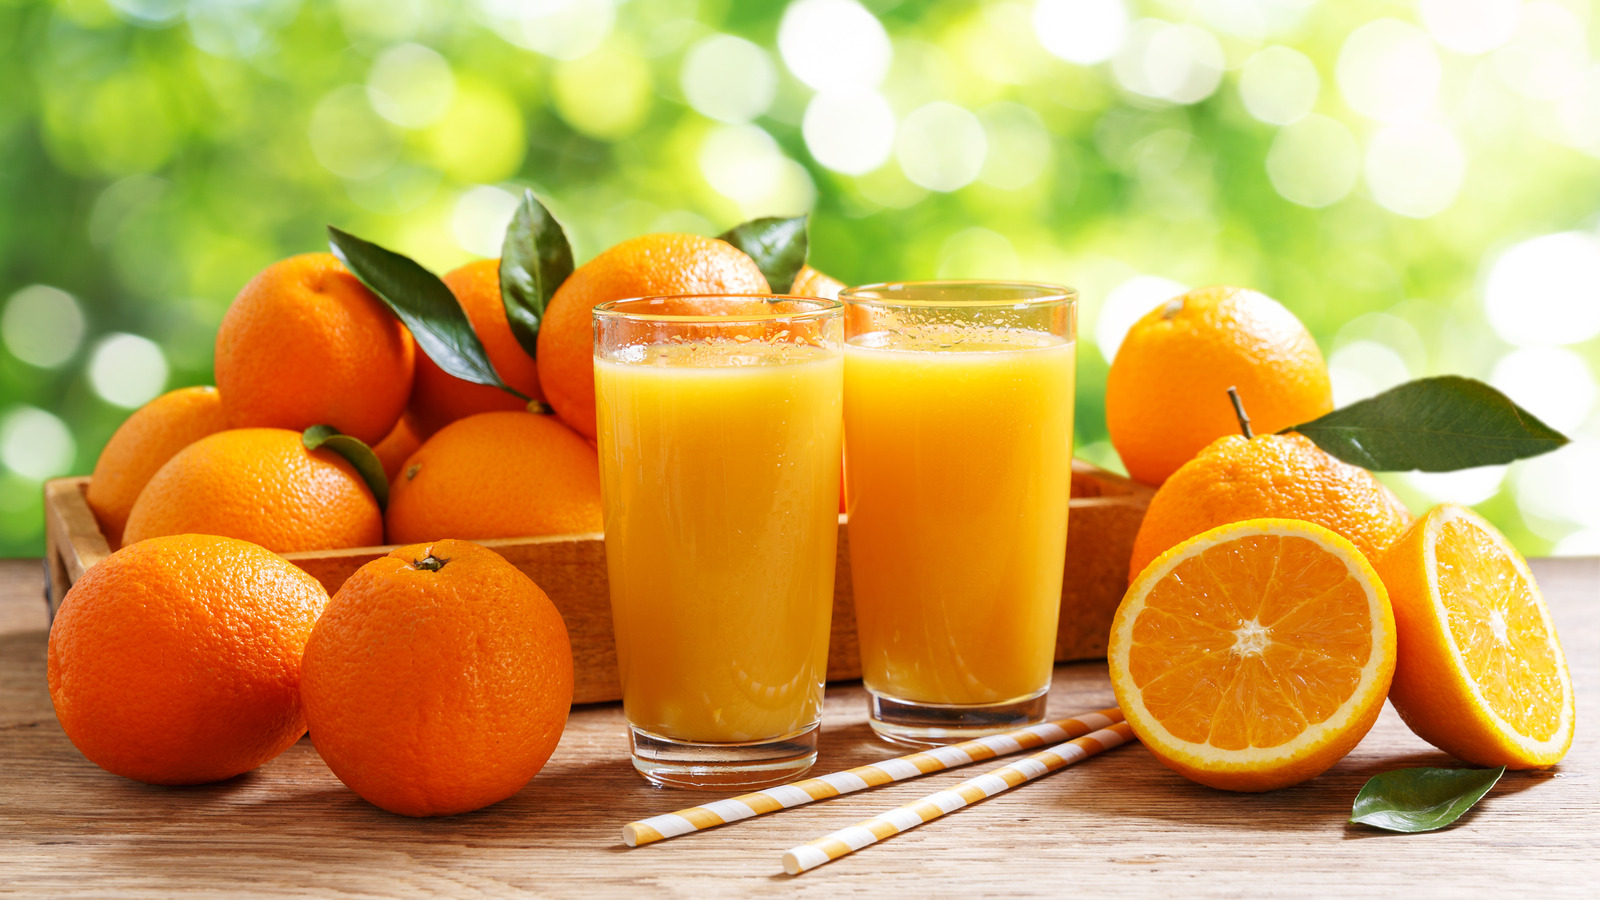 How Long Can Orange Juice Be Left Out At Room Temperature?